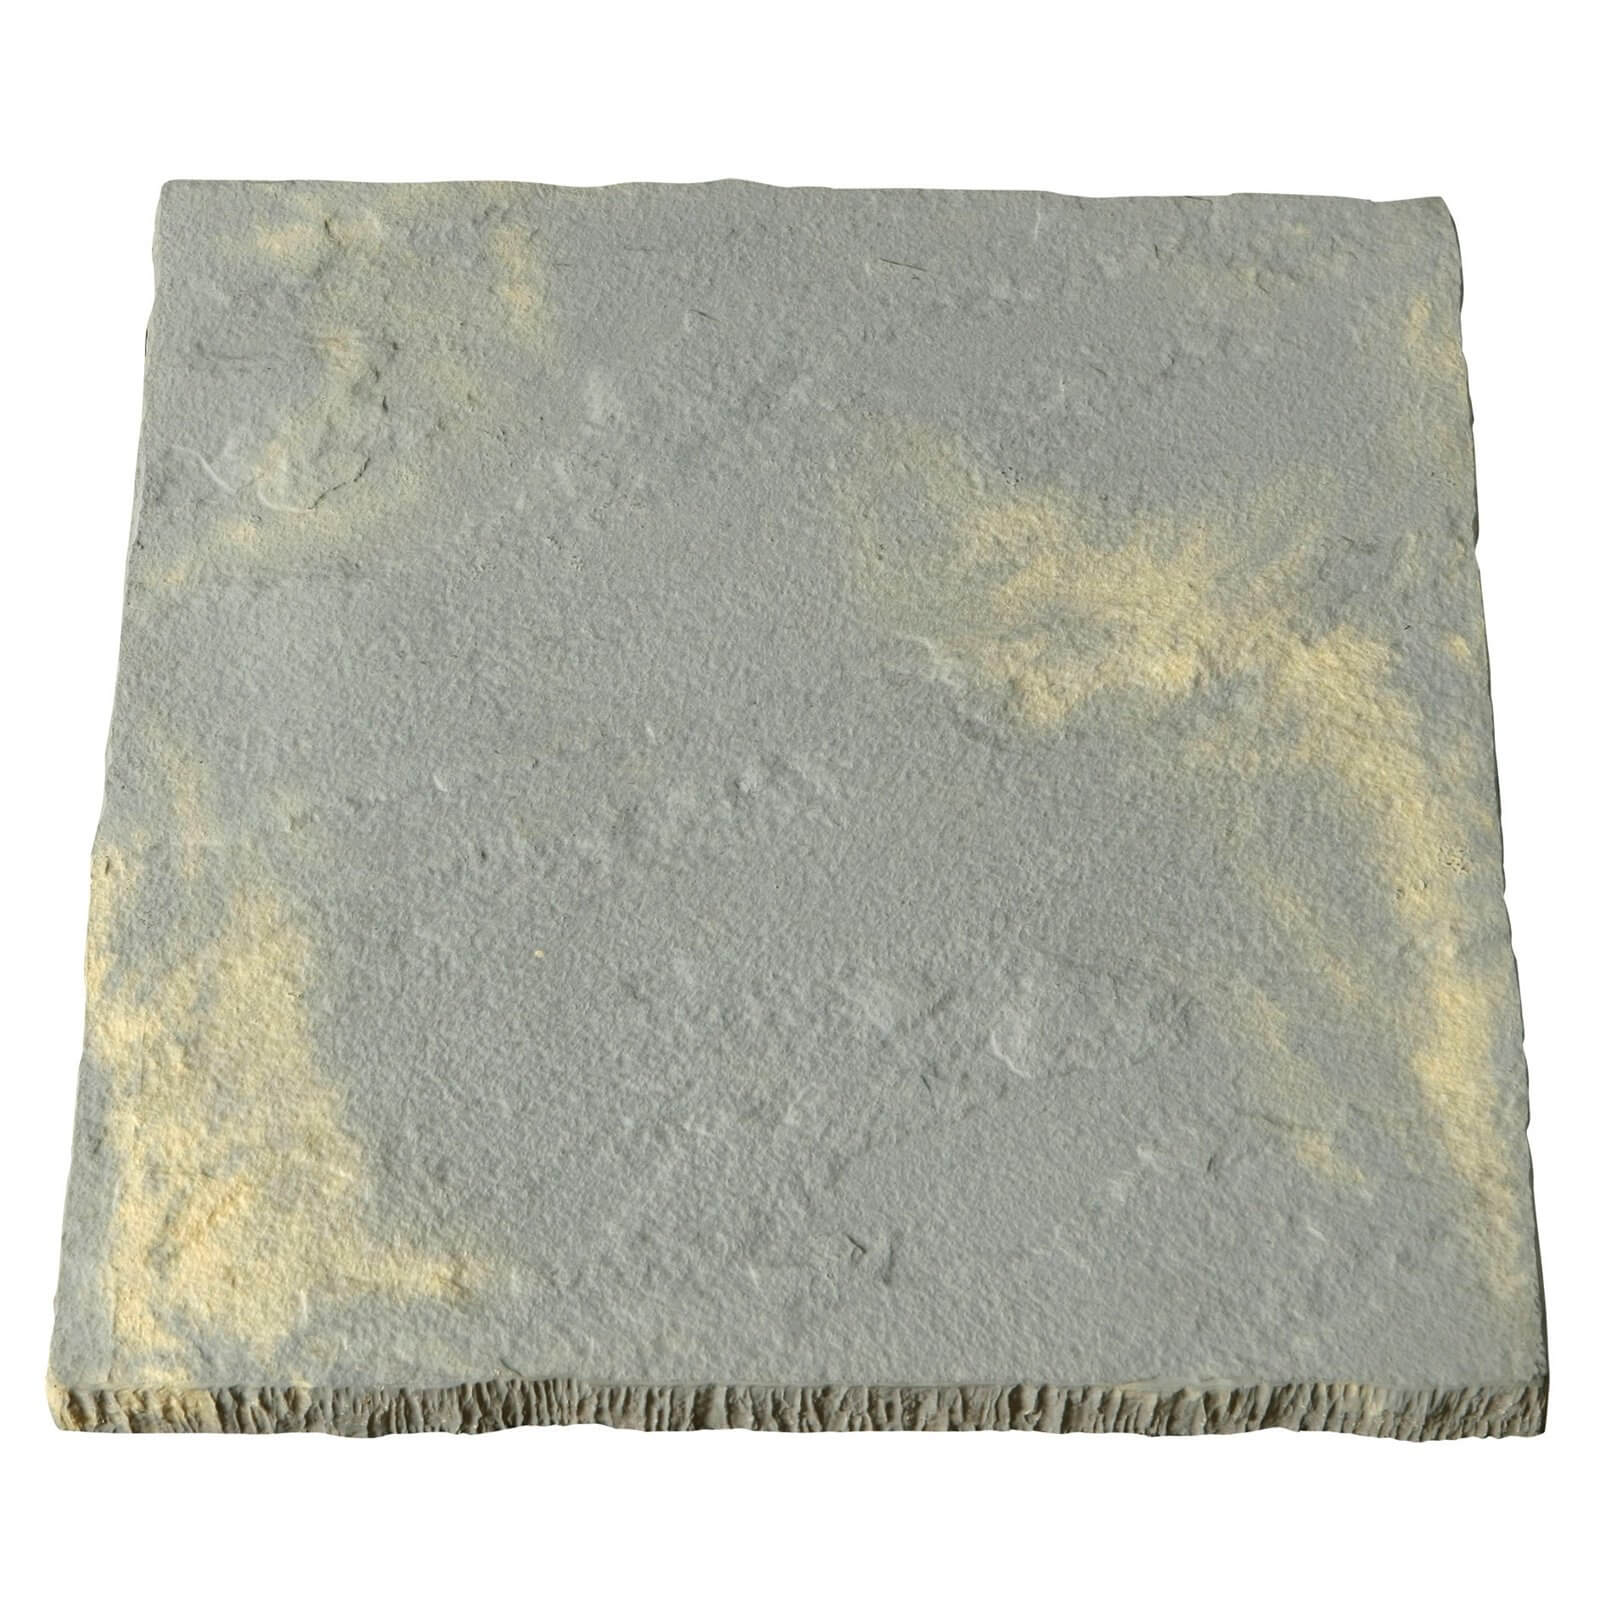 Chantry Paving 450 x 450mm Antique - Full Pack of 28 Slabs